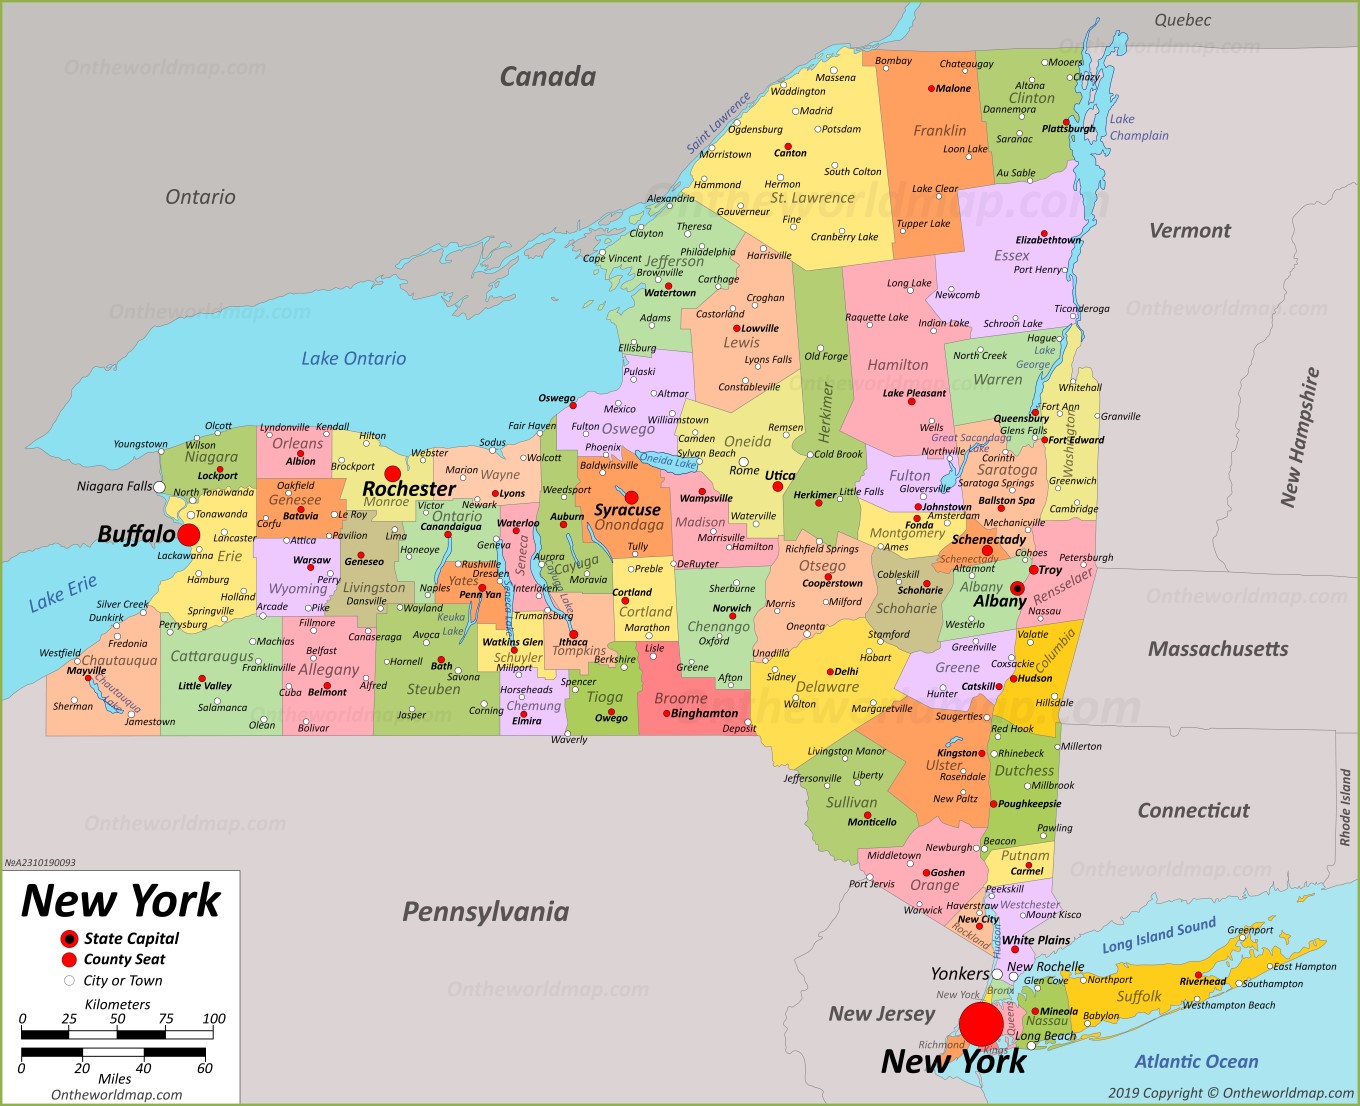 show me a map of new york New York State Maps Usa Maps Of New York Ny show me a map of new york